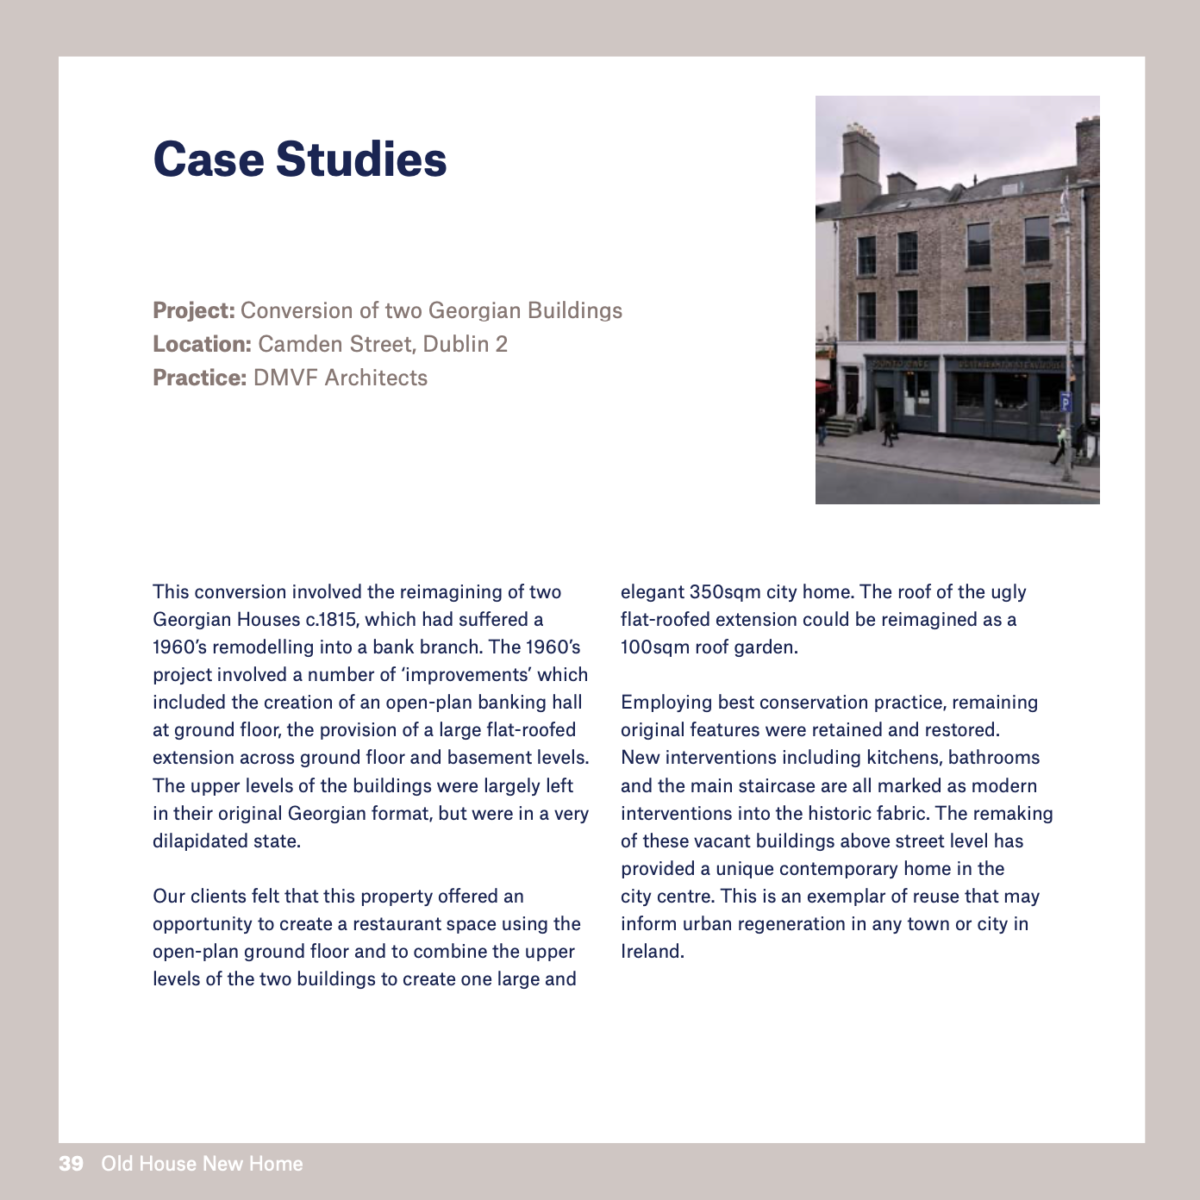 RIAI Old House New Home Publication